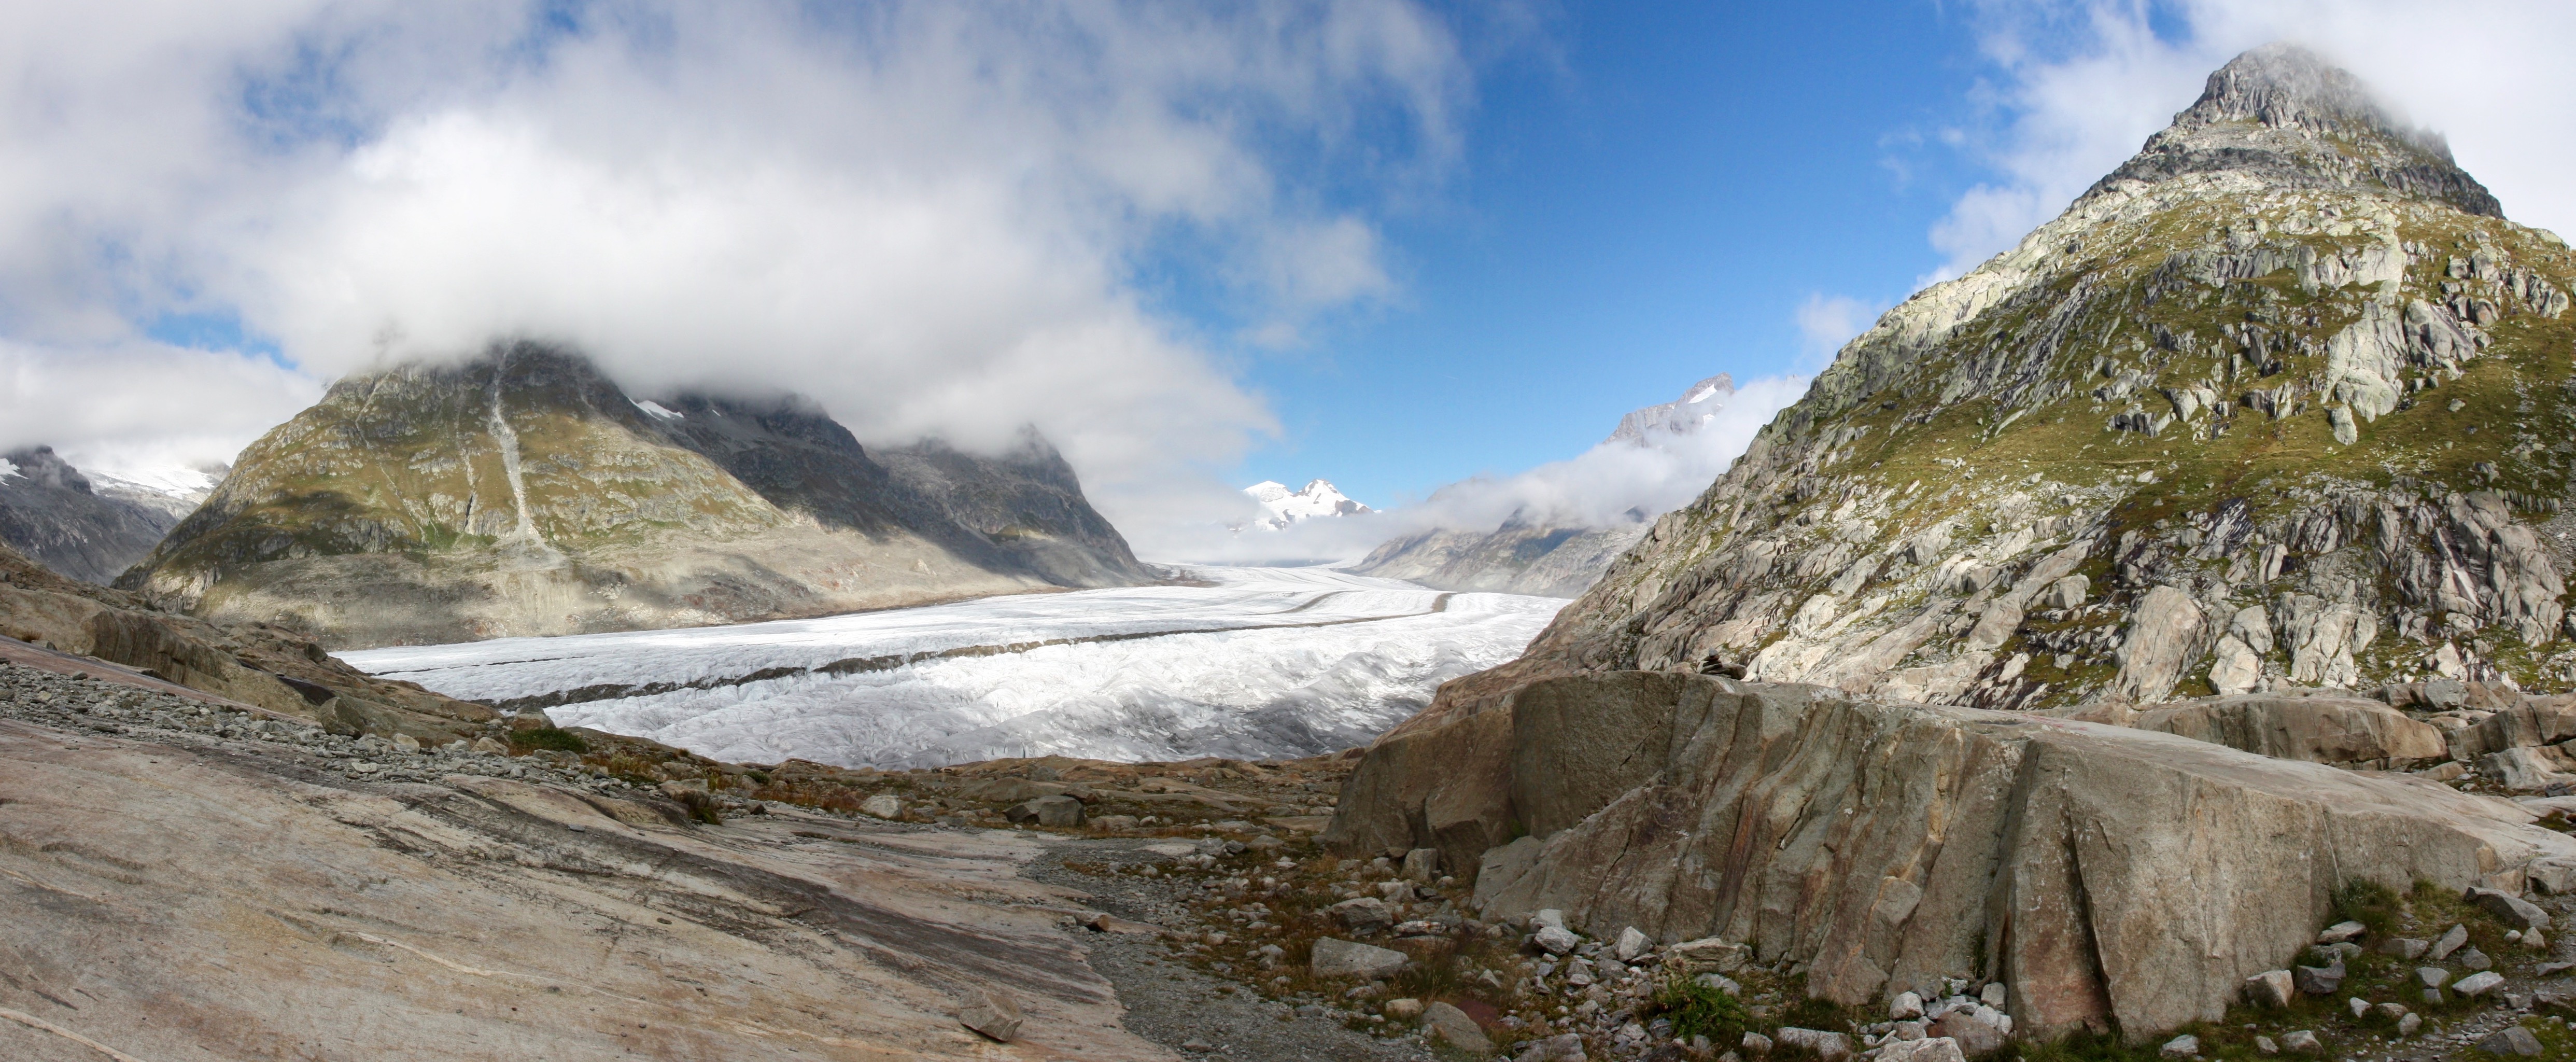 Panorama of the Aletsch Glacier from near the Märjelensee, with Strahlhorn (3027m) to the right.